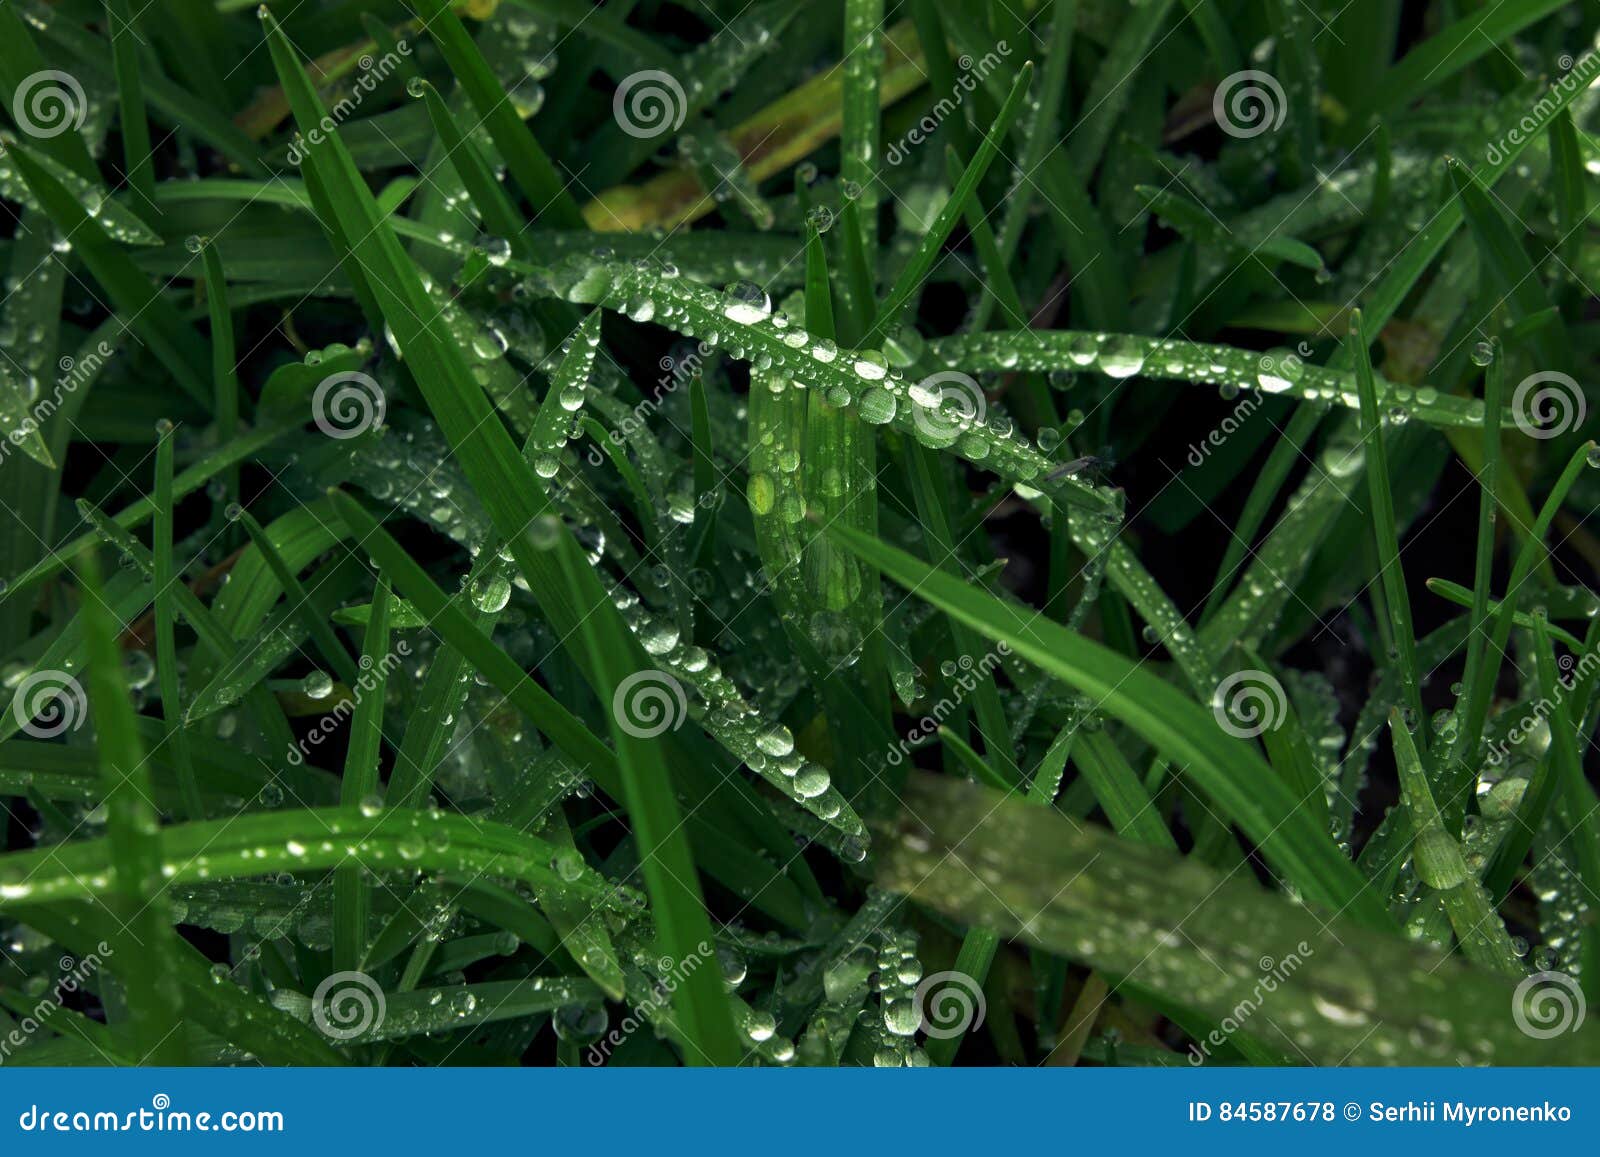 green grass and water drops and insecto on top